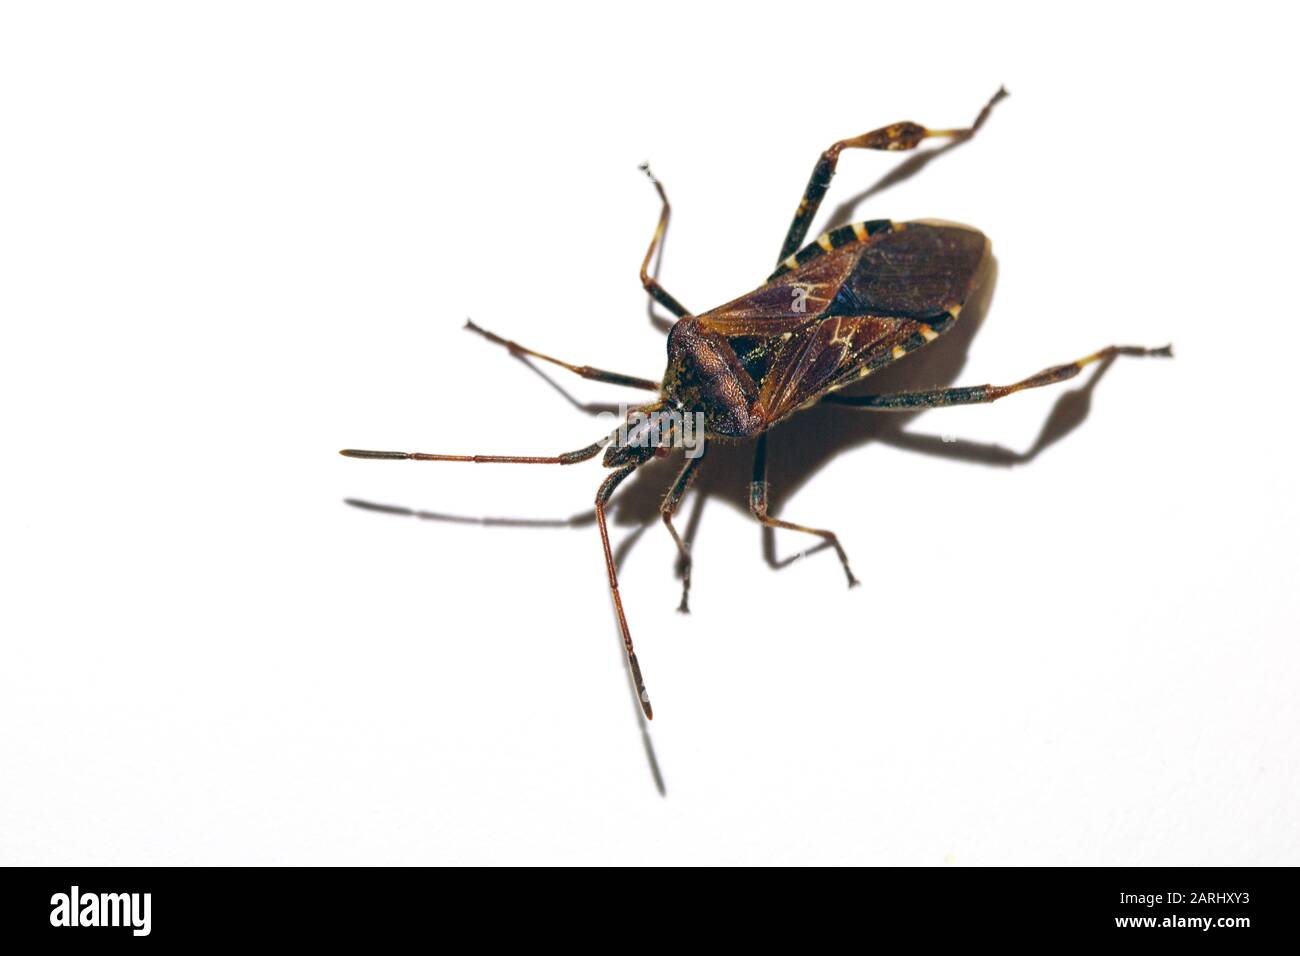 The western conifer seed bug (Leptoglossus occidentalis), sometimes abbreviated as WCSB, is a species of true bug (Hemiptera) in the family Coreidae Stock Photo